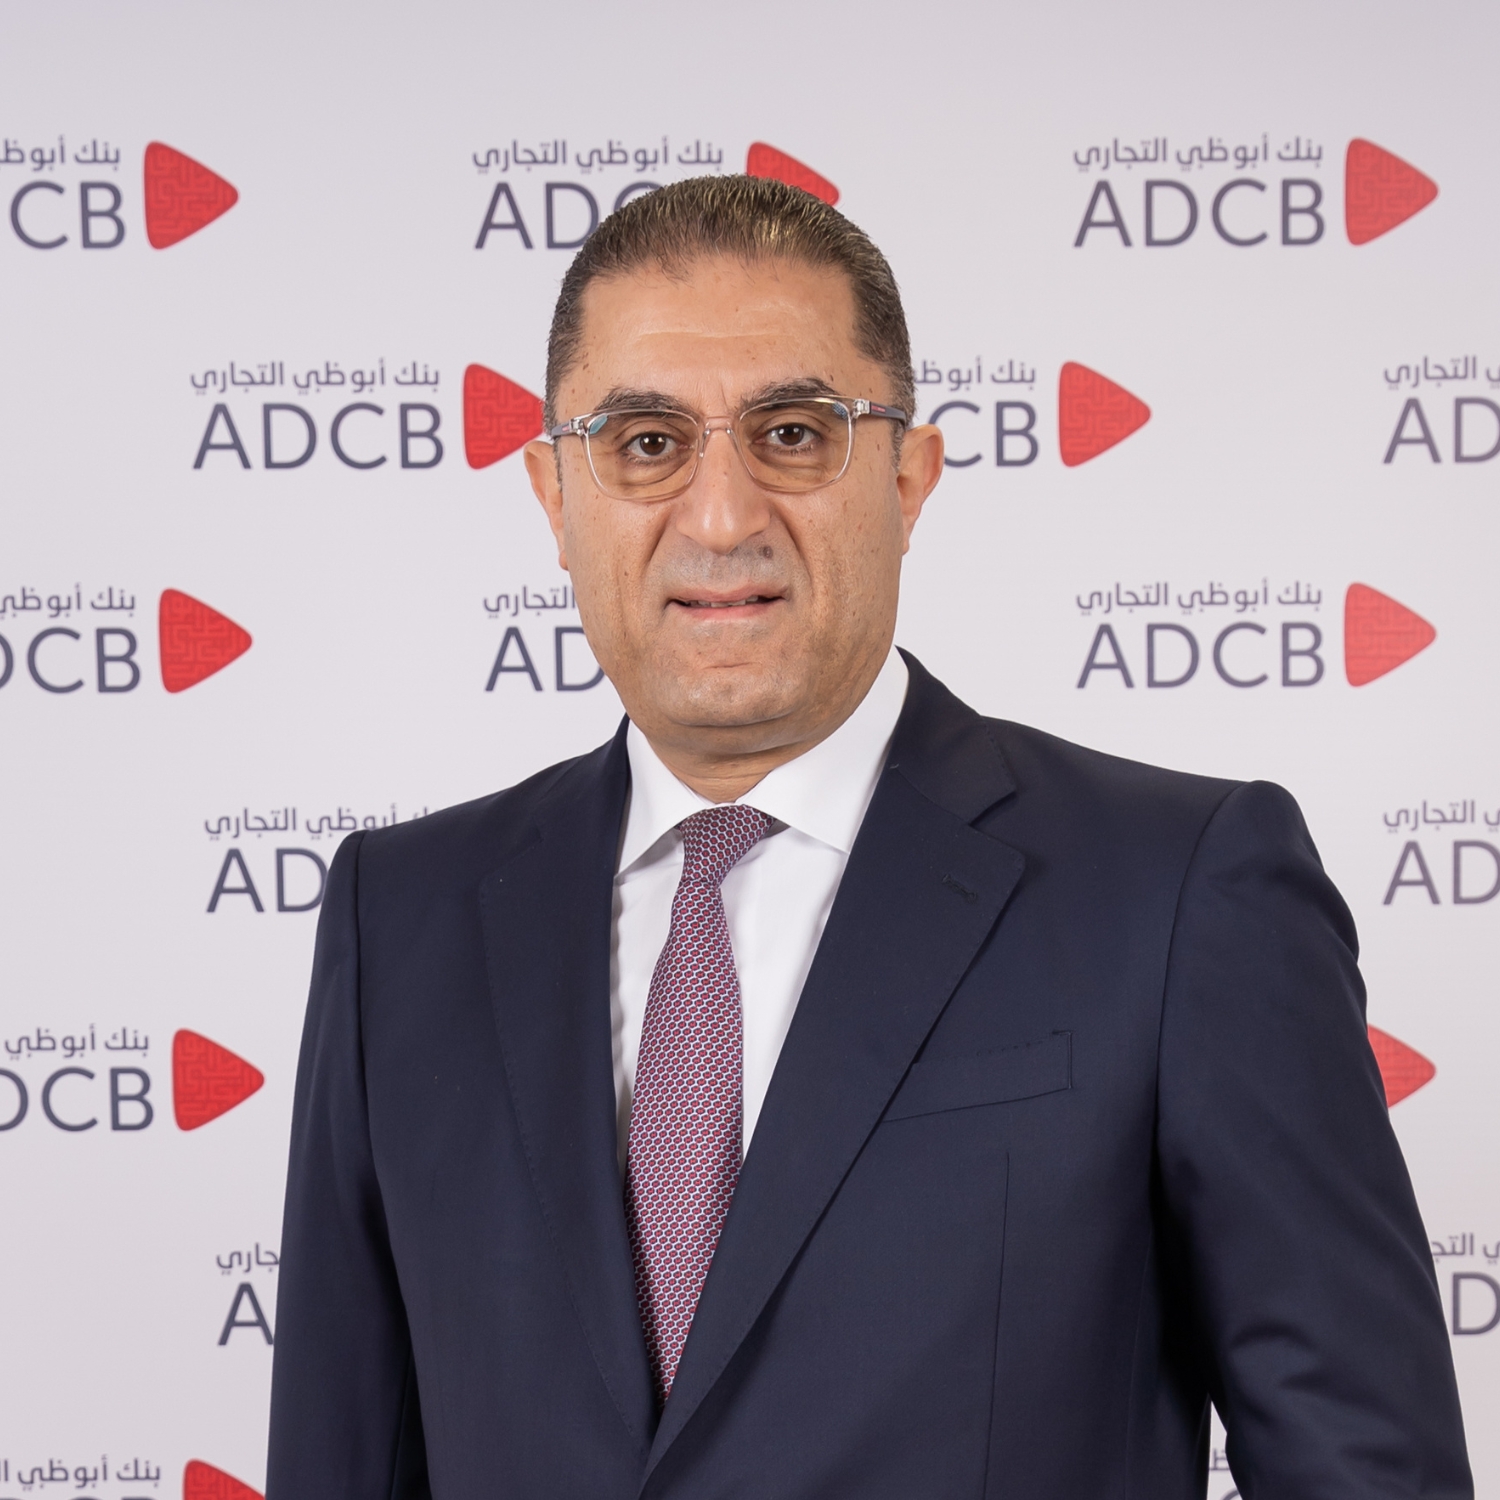 Mr. Ihab ElSewerky _ ADCB Egypt Managing Director and CEO (Executive)